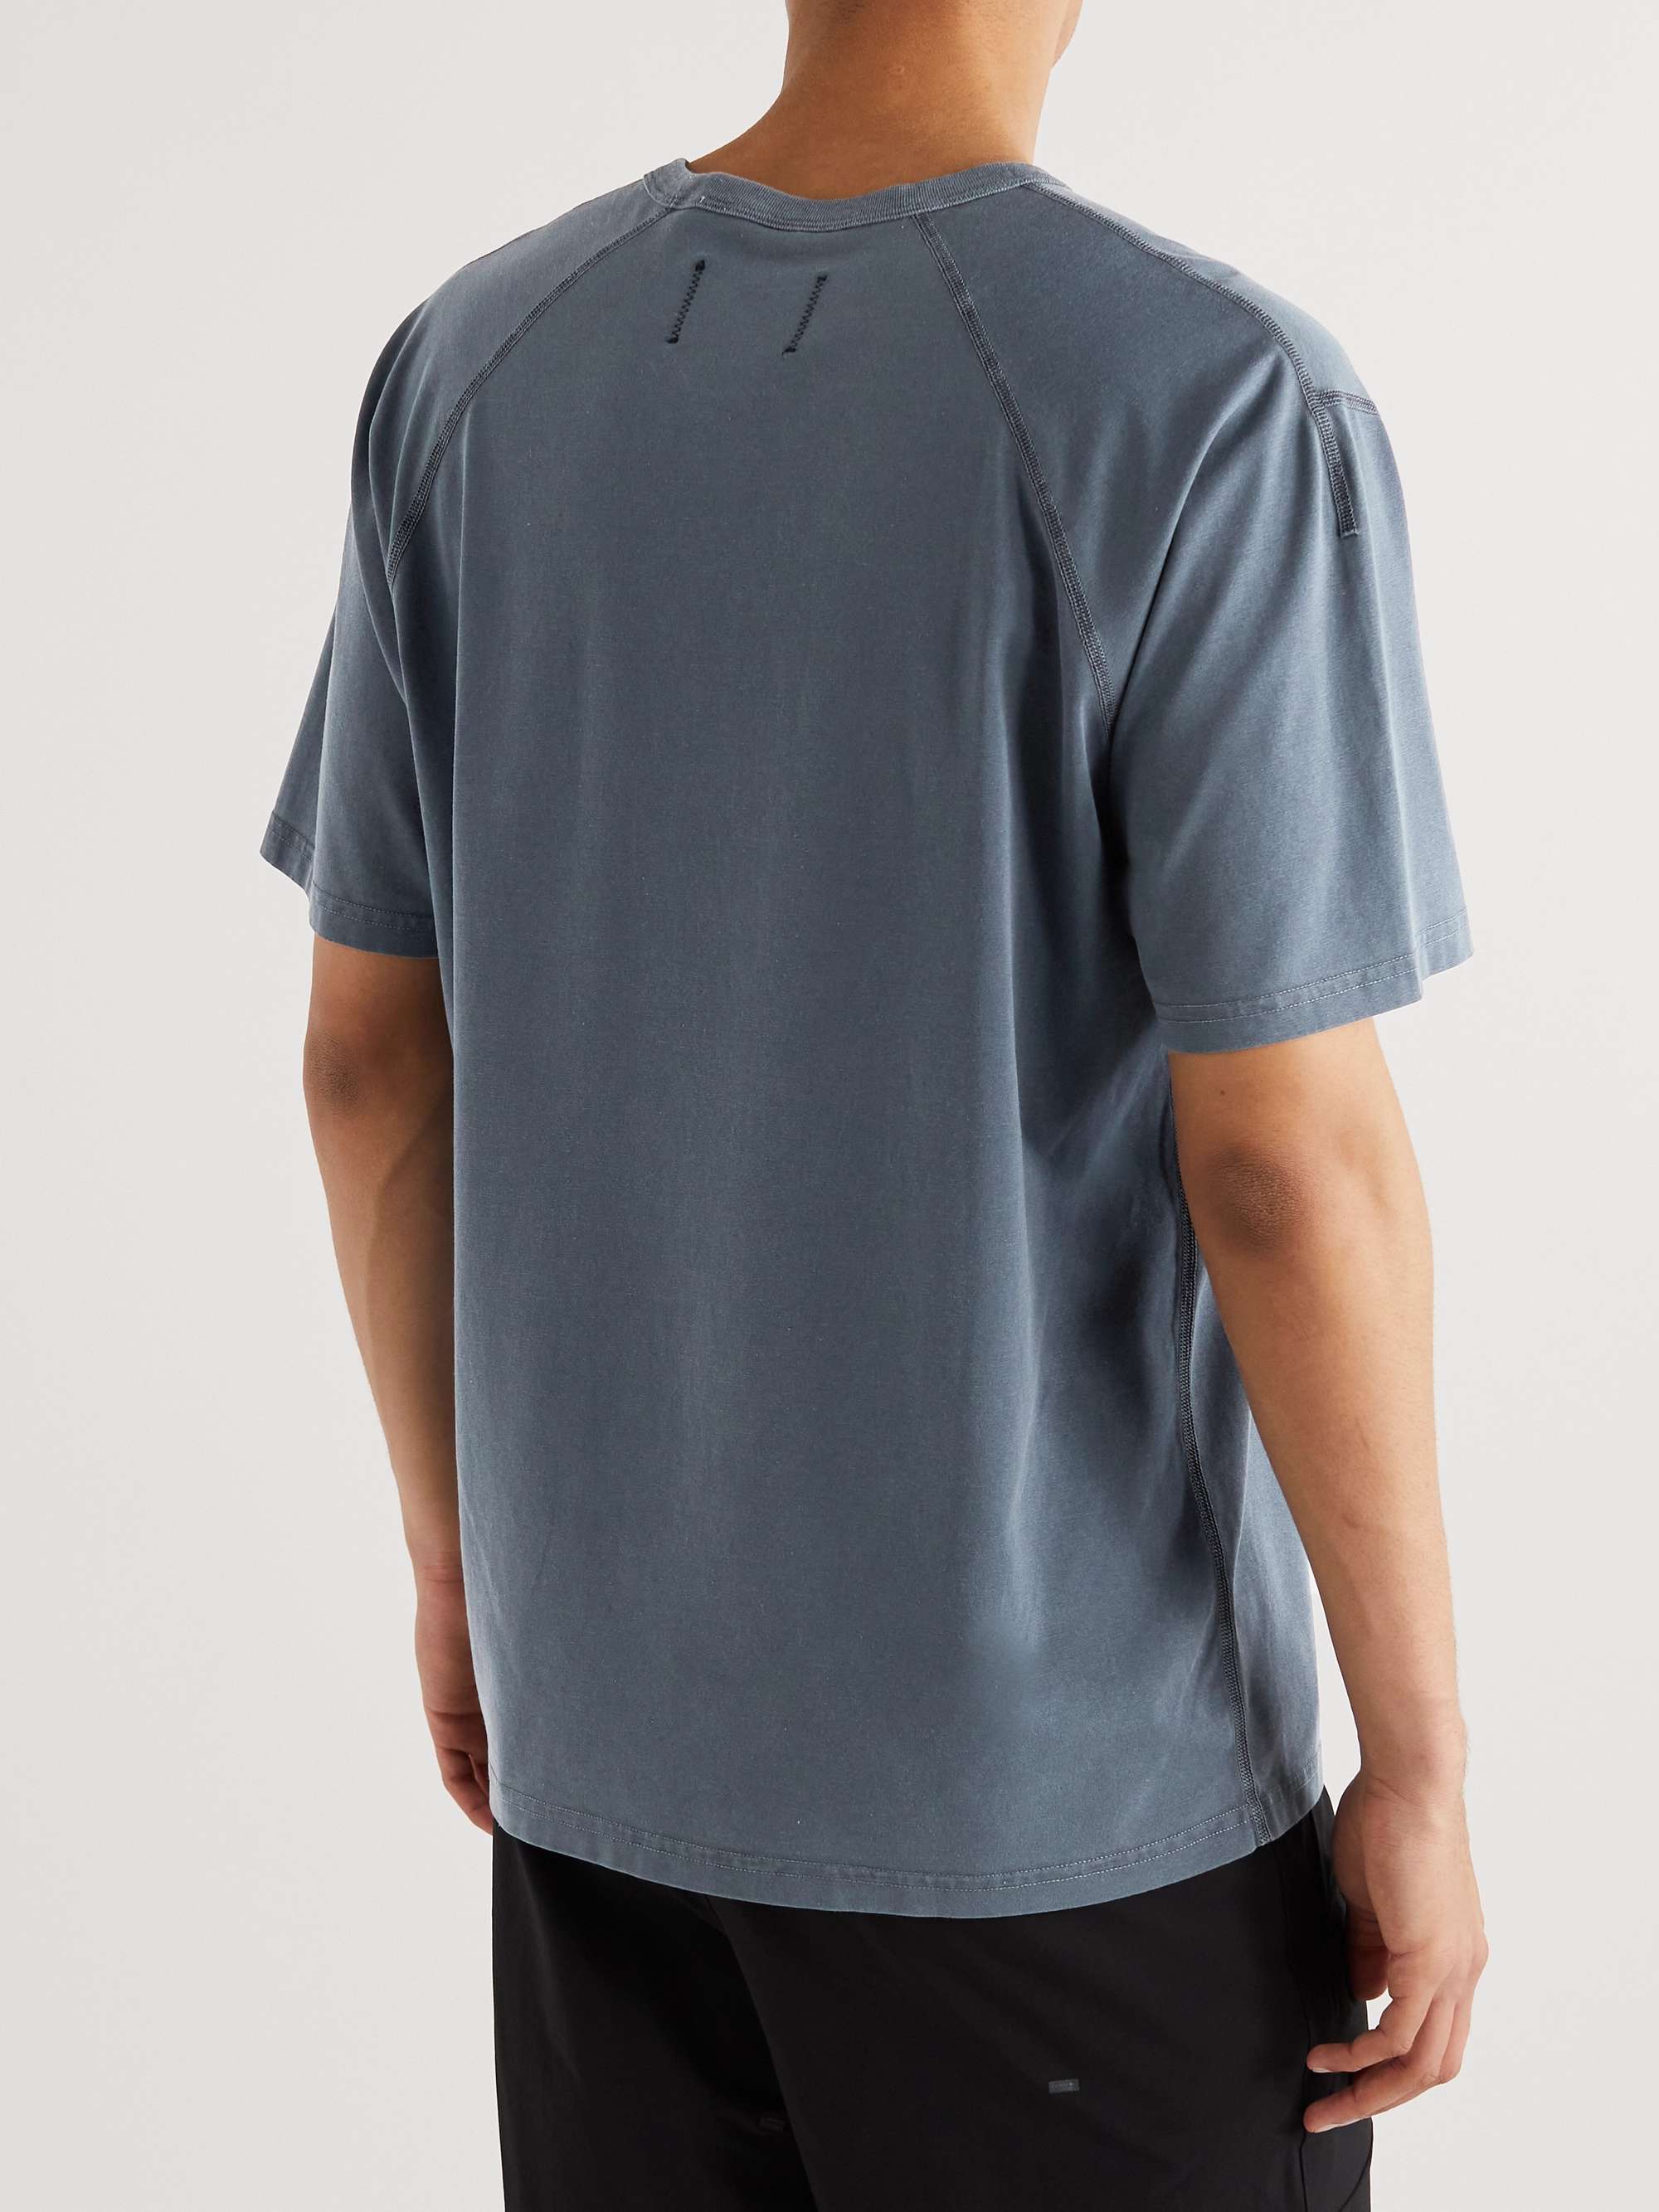 REIGNING CHAMP + Ryan Willms Garment-Dyed Printed Cotton-Blend Jersey T-Shirt